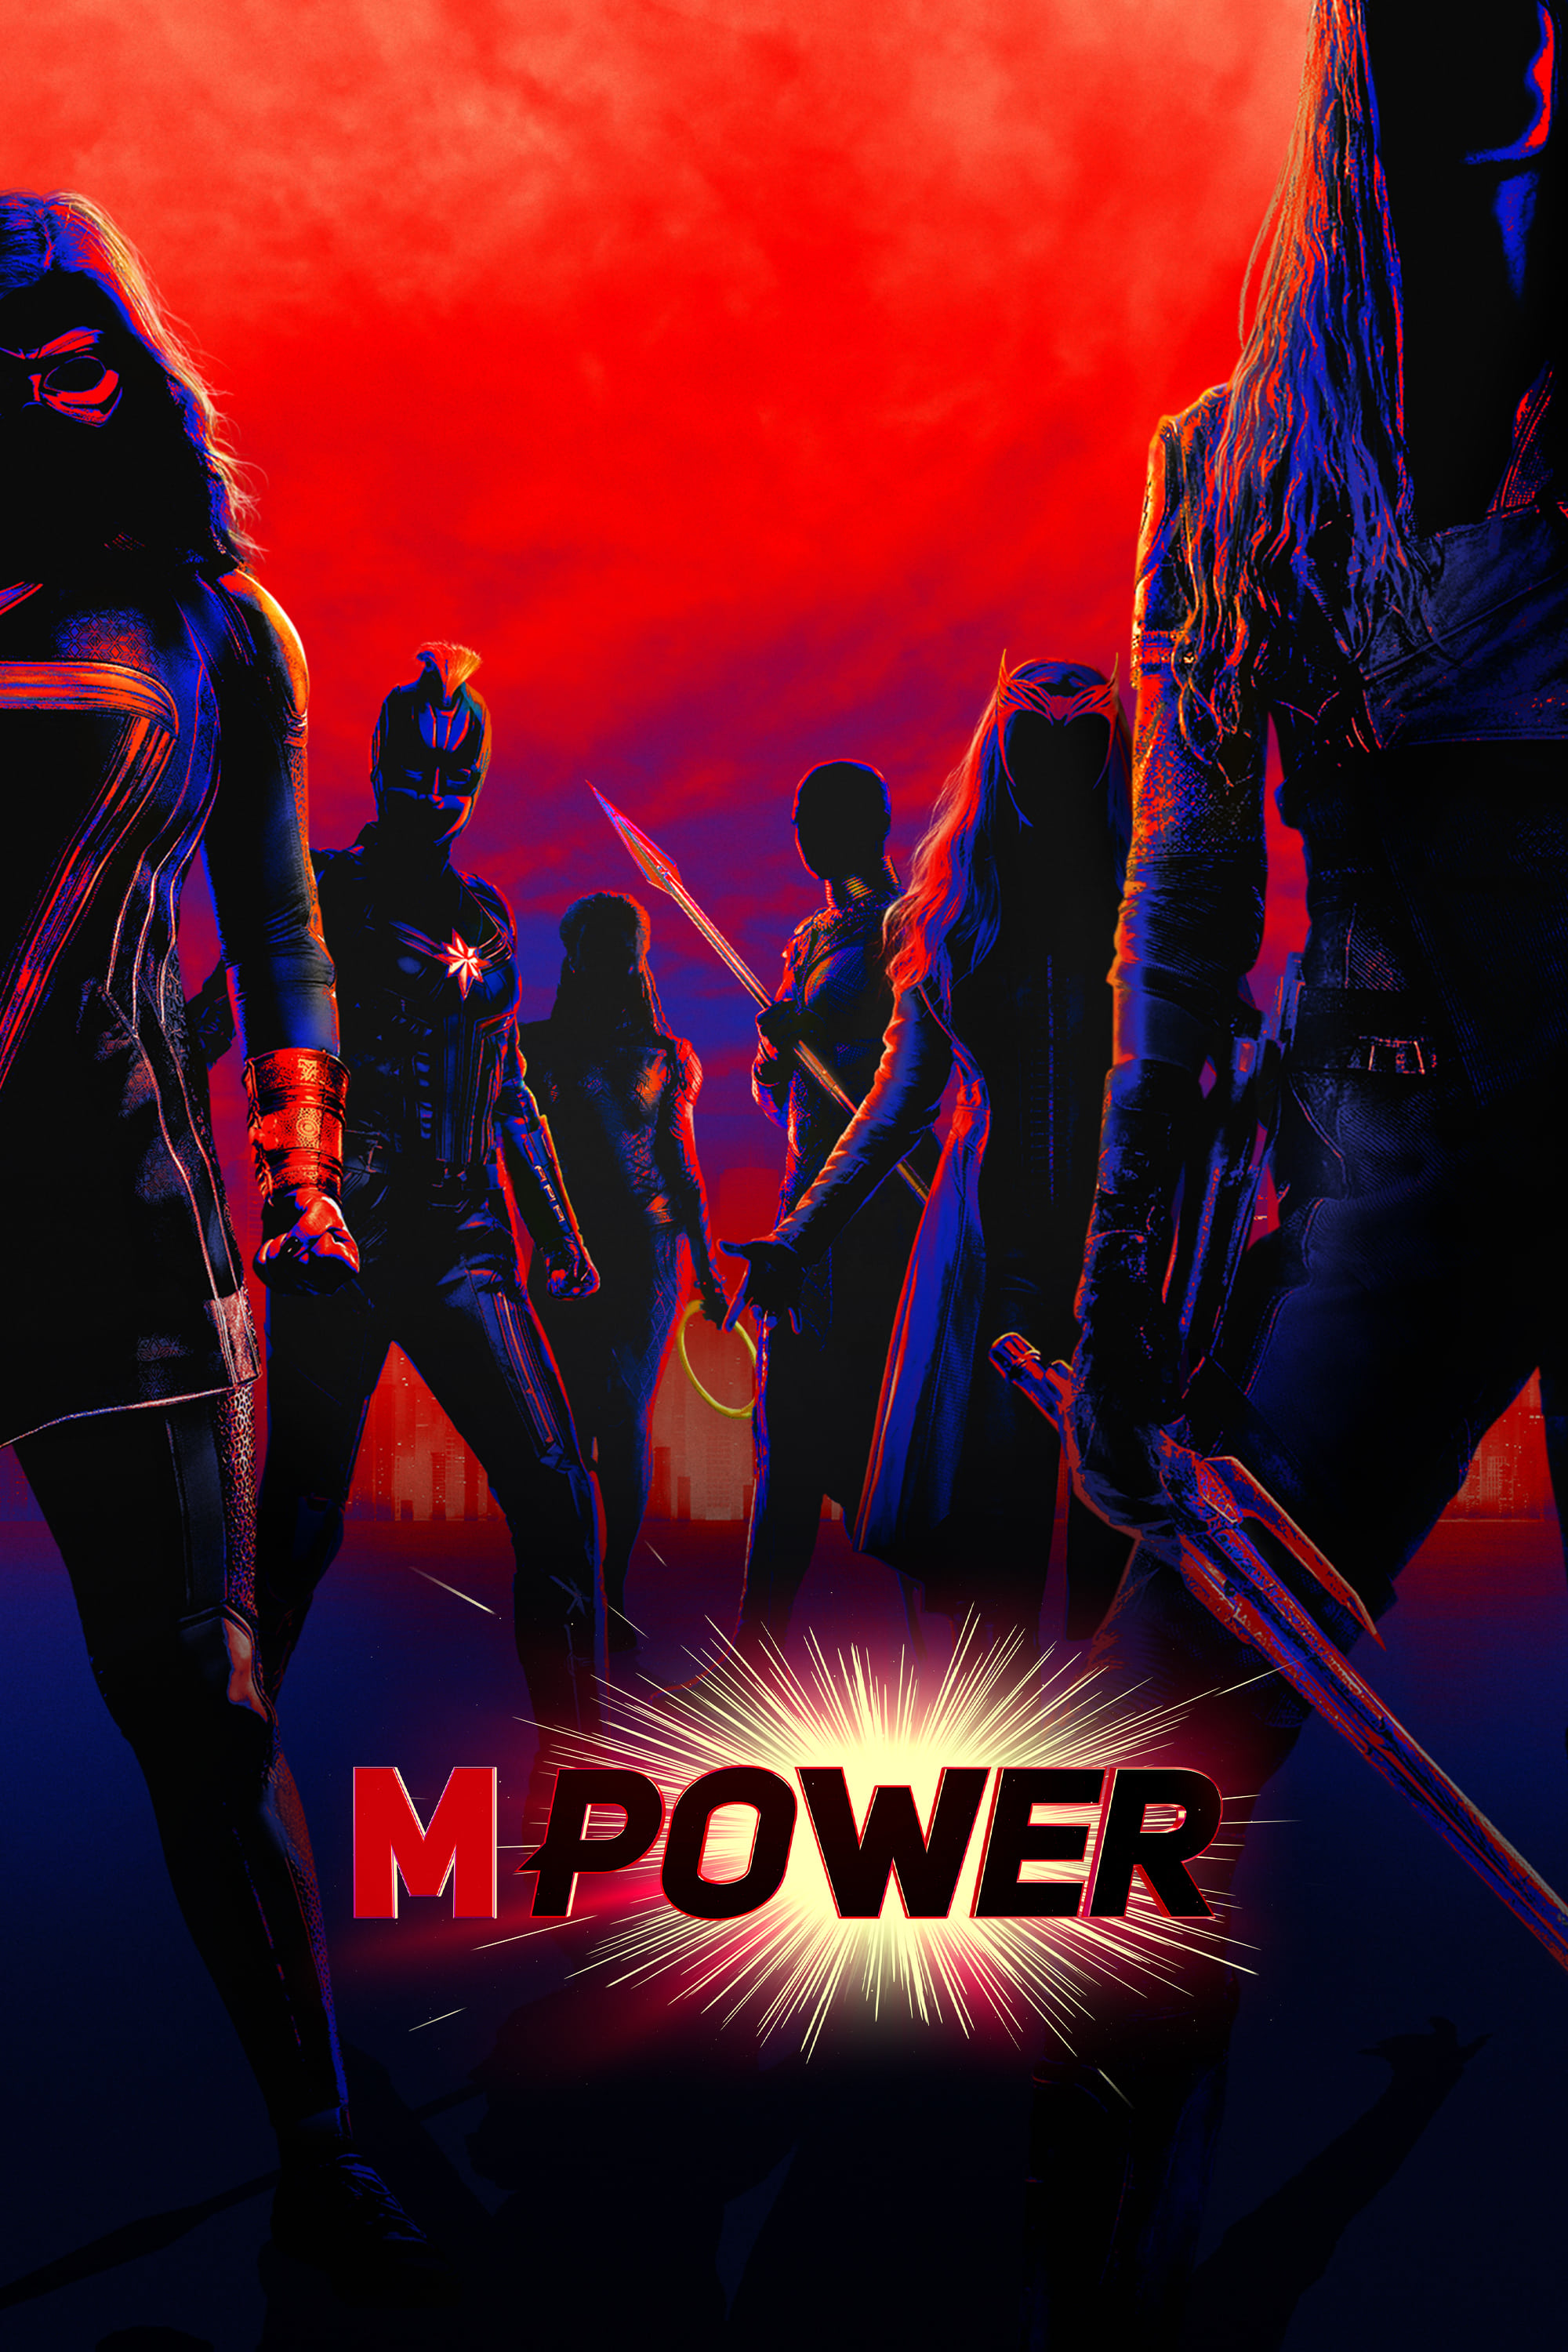 MPower TV Shows About Women